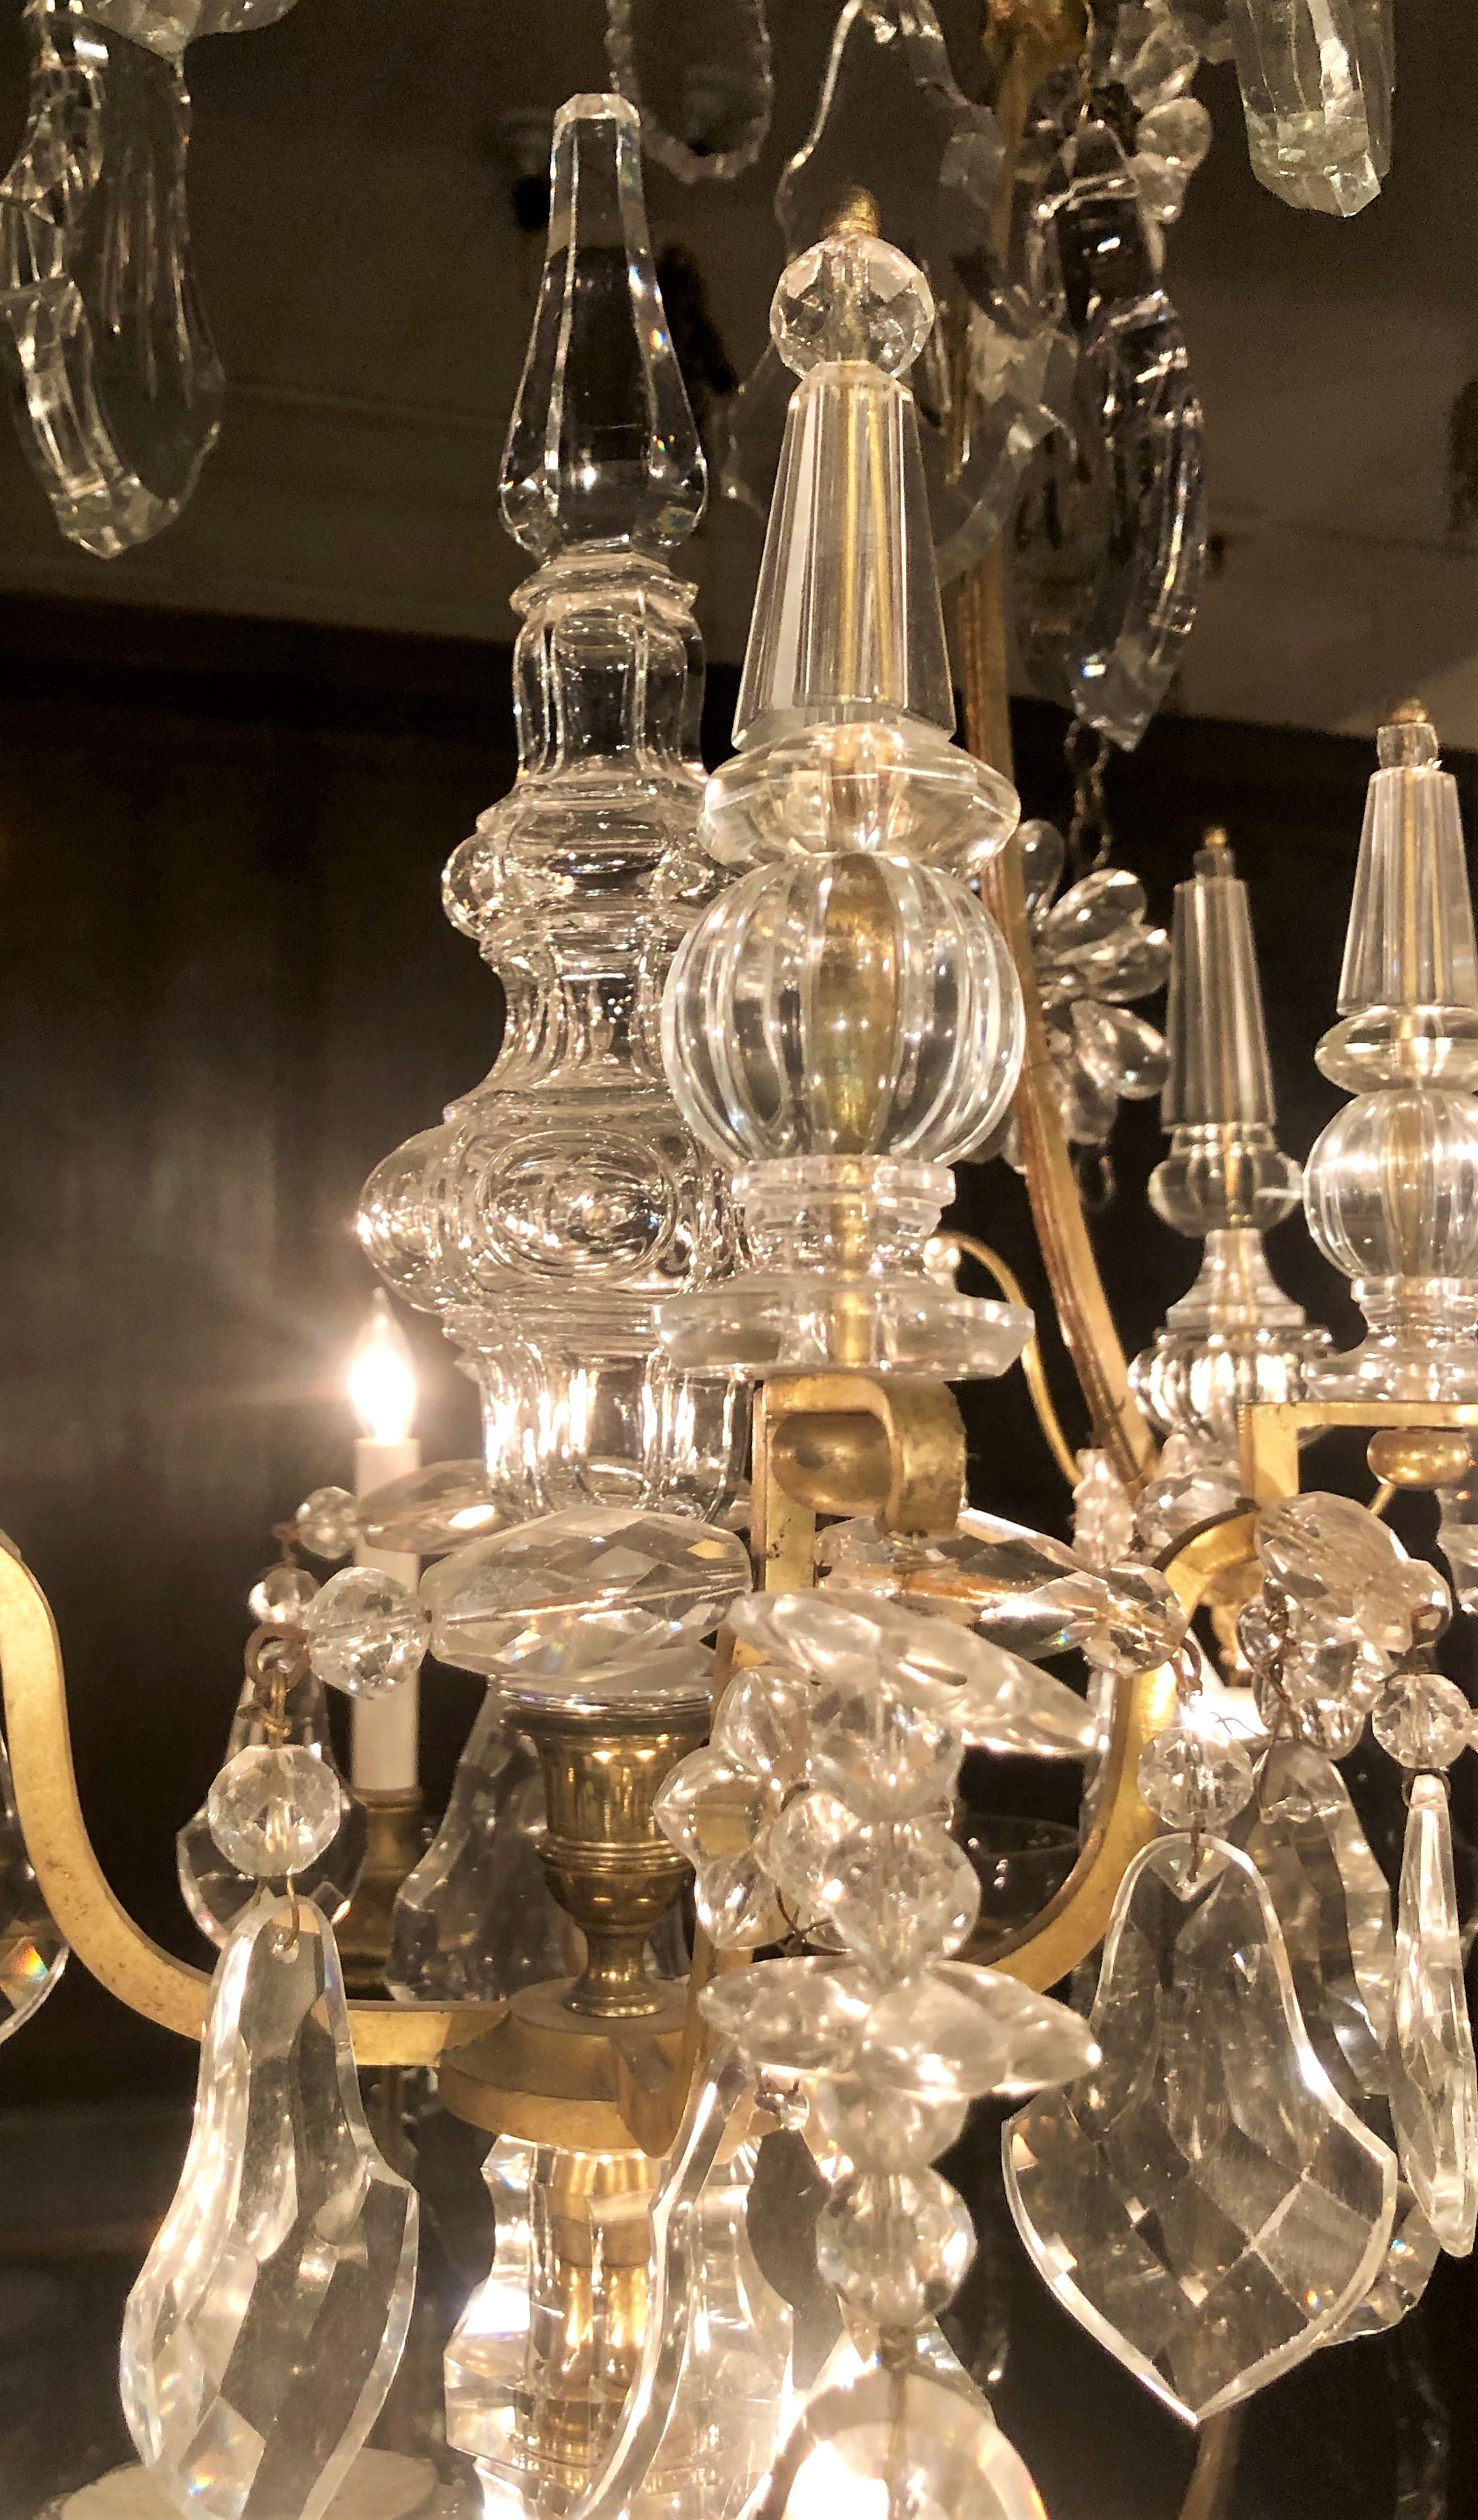 Antique French Baccarat Crystal & Bronze D'Ore Versailles Chandelier, circa 1880 In Excellent Condition For Sale In New Orleans, LA